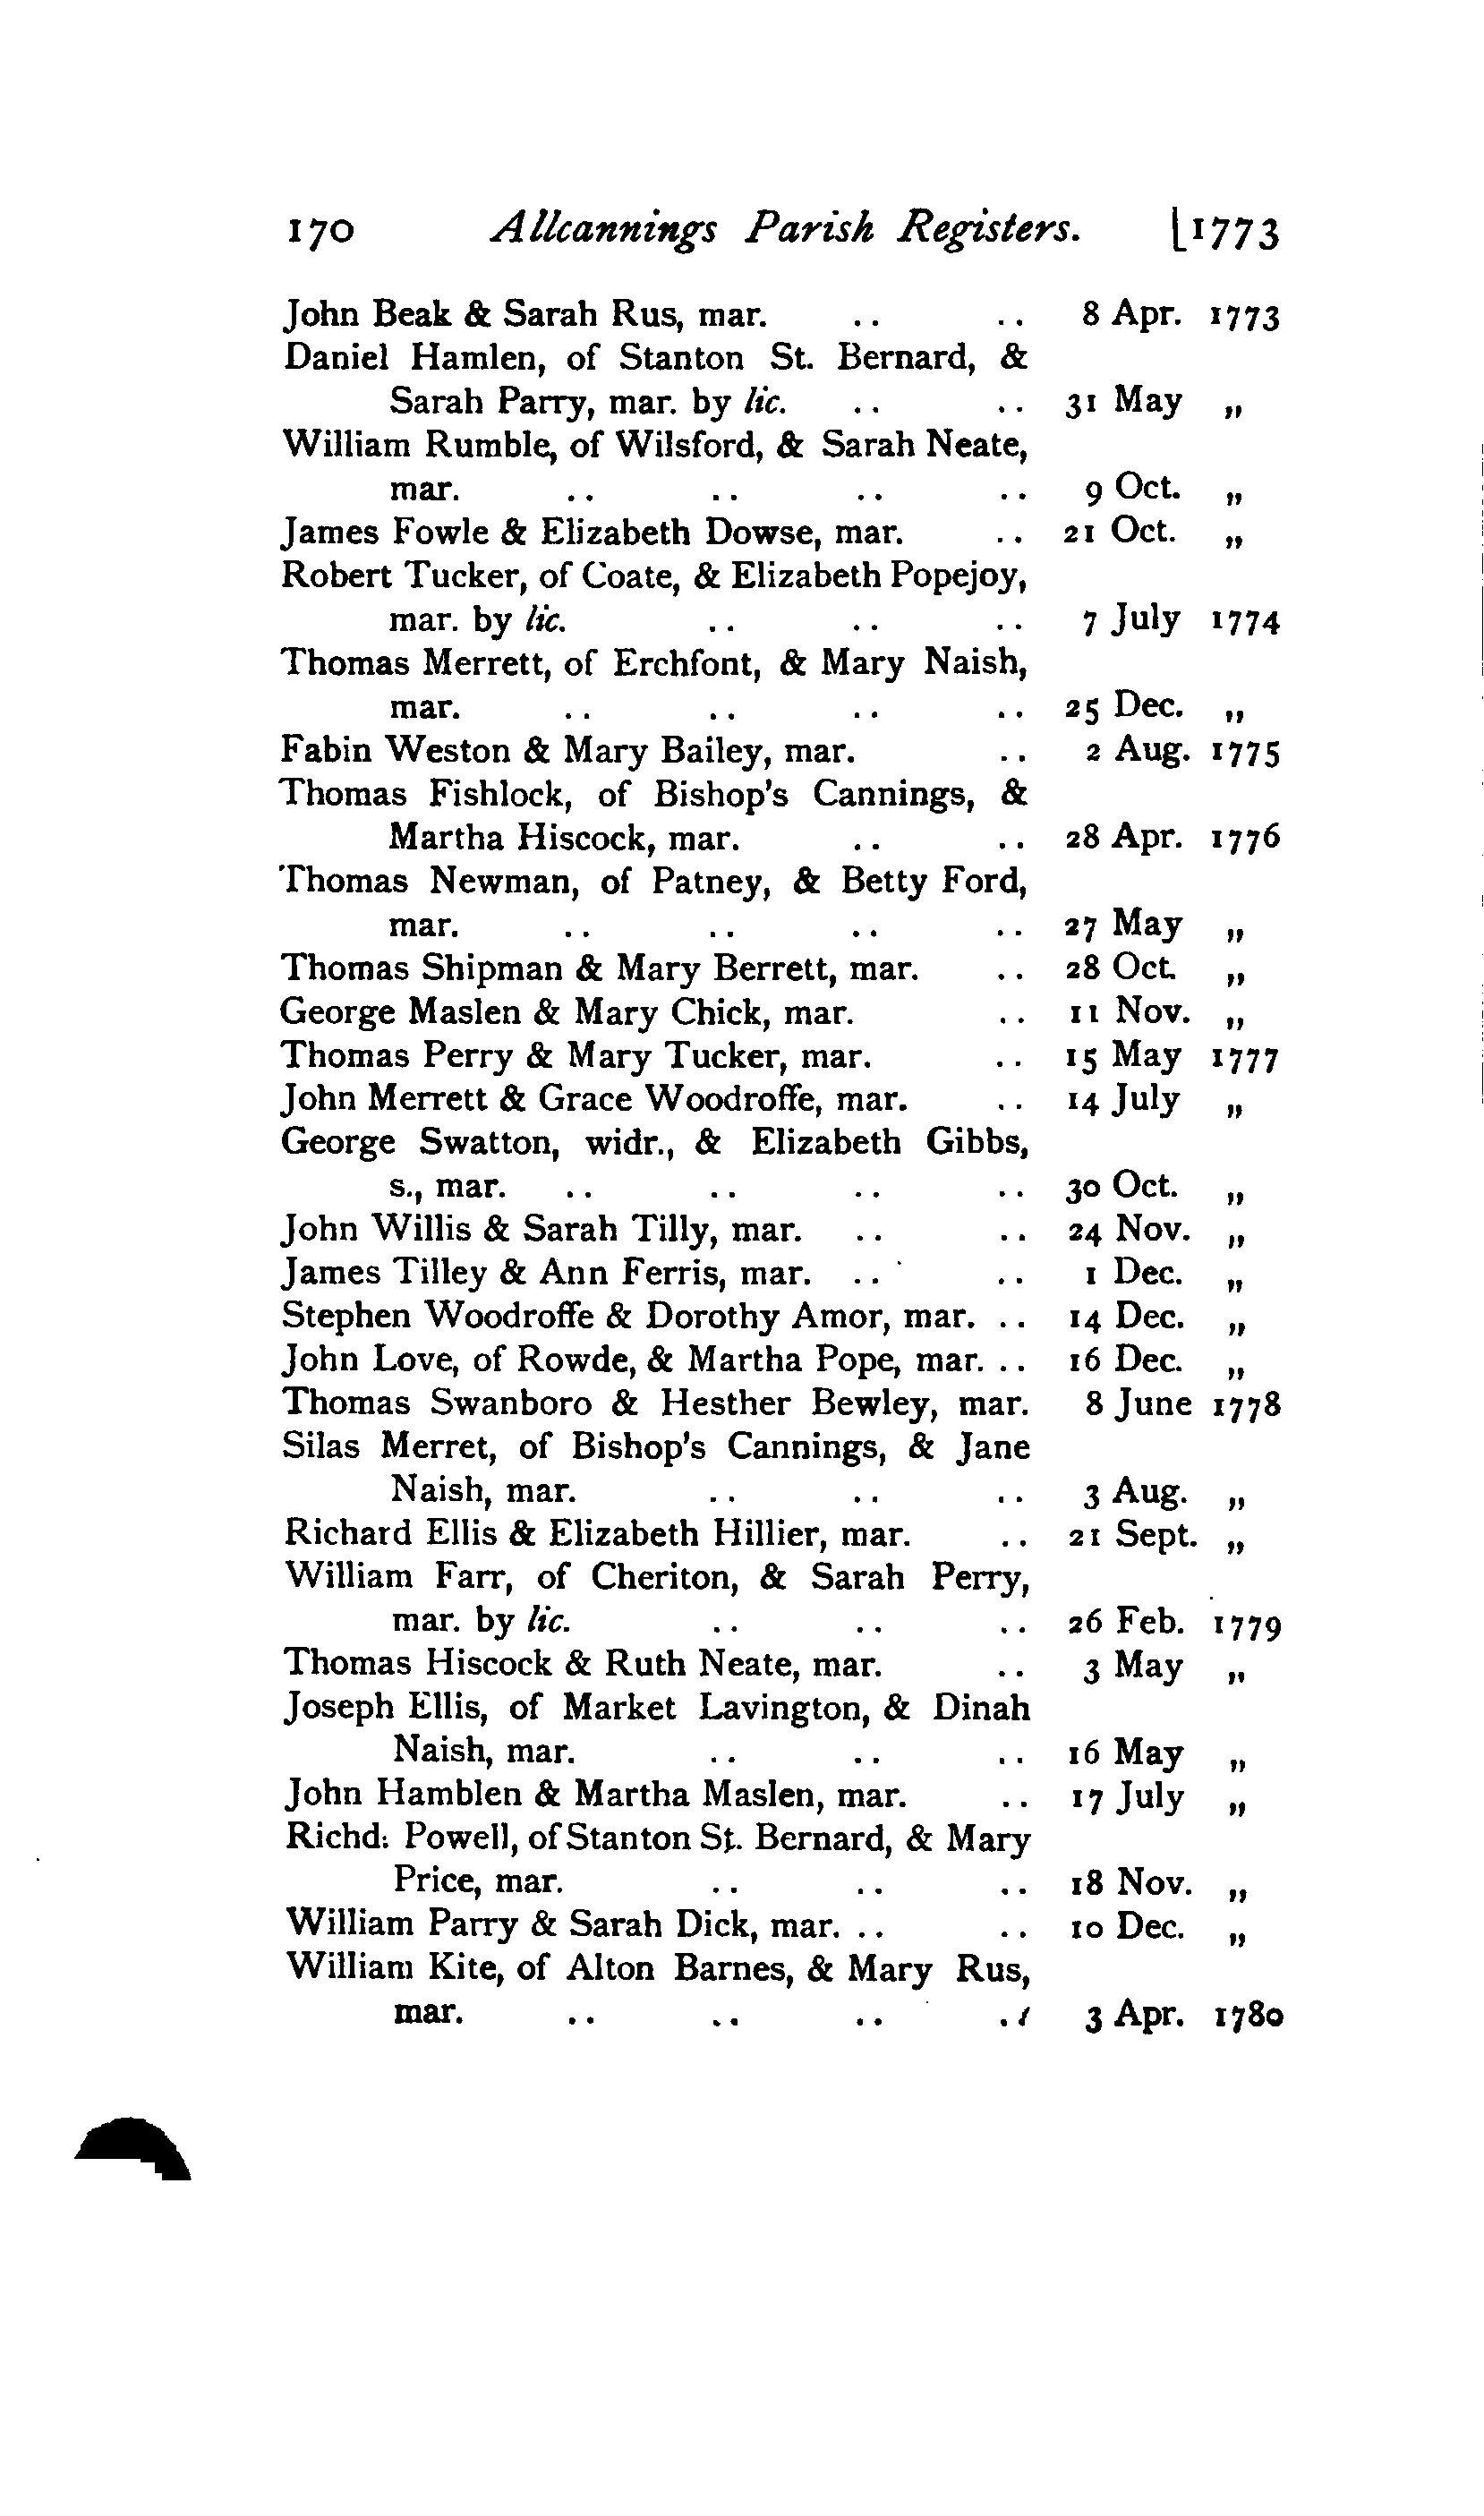 All Cannings parish registers - 1905 transcript - showing marriage of Thomas Swanboro & Hesther Bewley in 1778